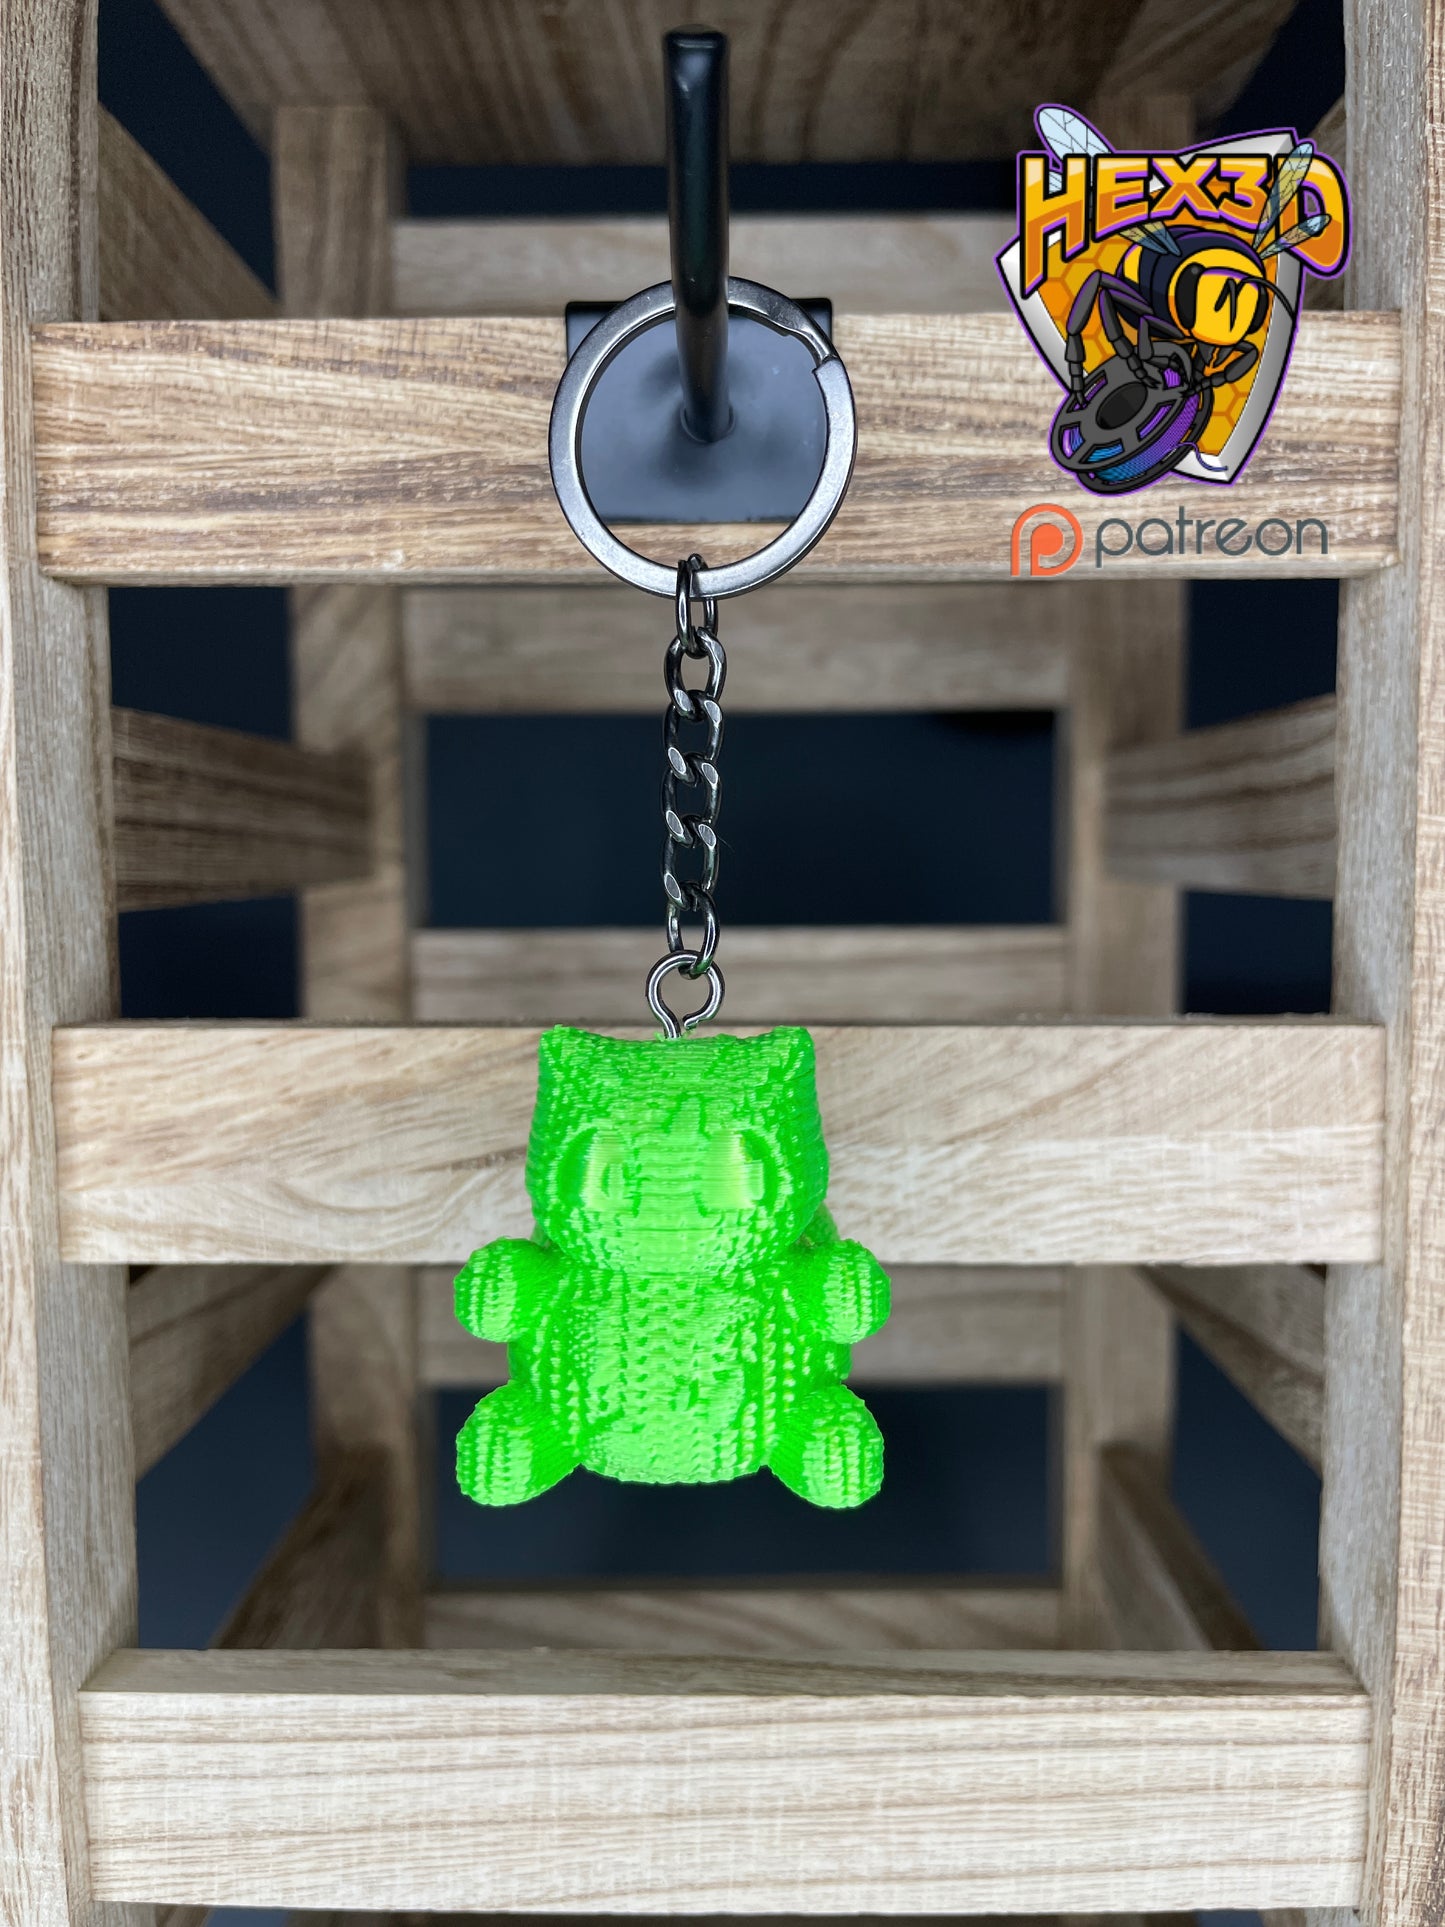 "Knitted" Bulbasaur Keychain by Hex3D